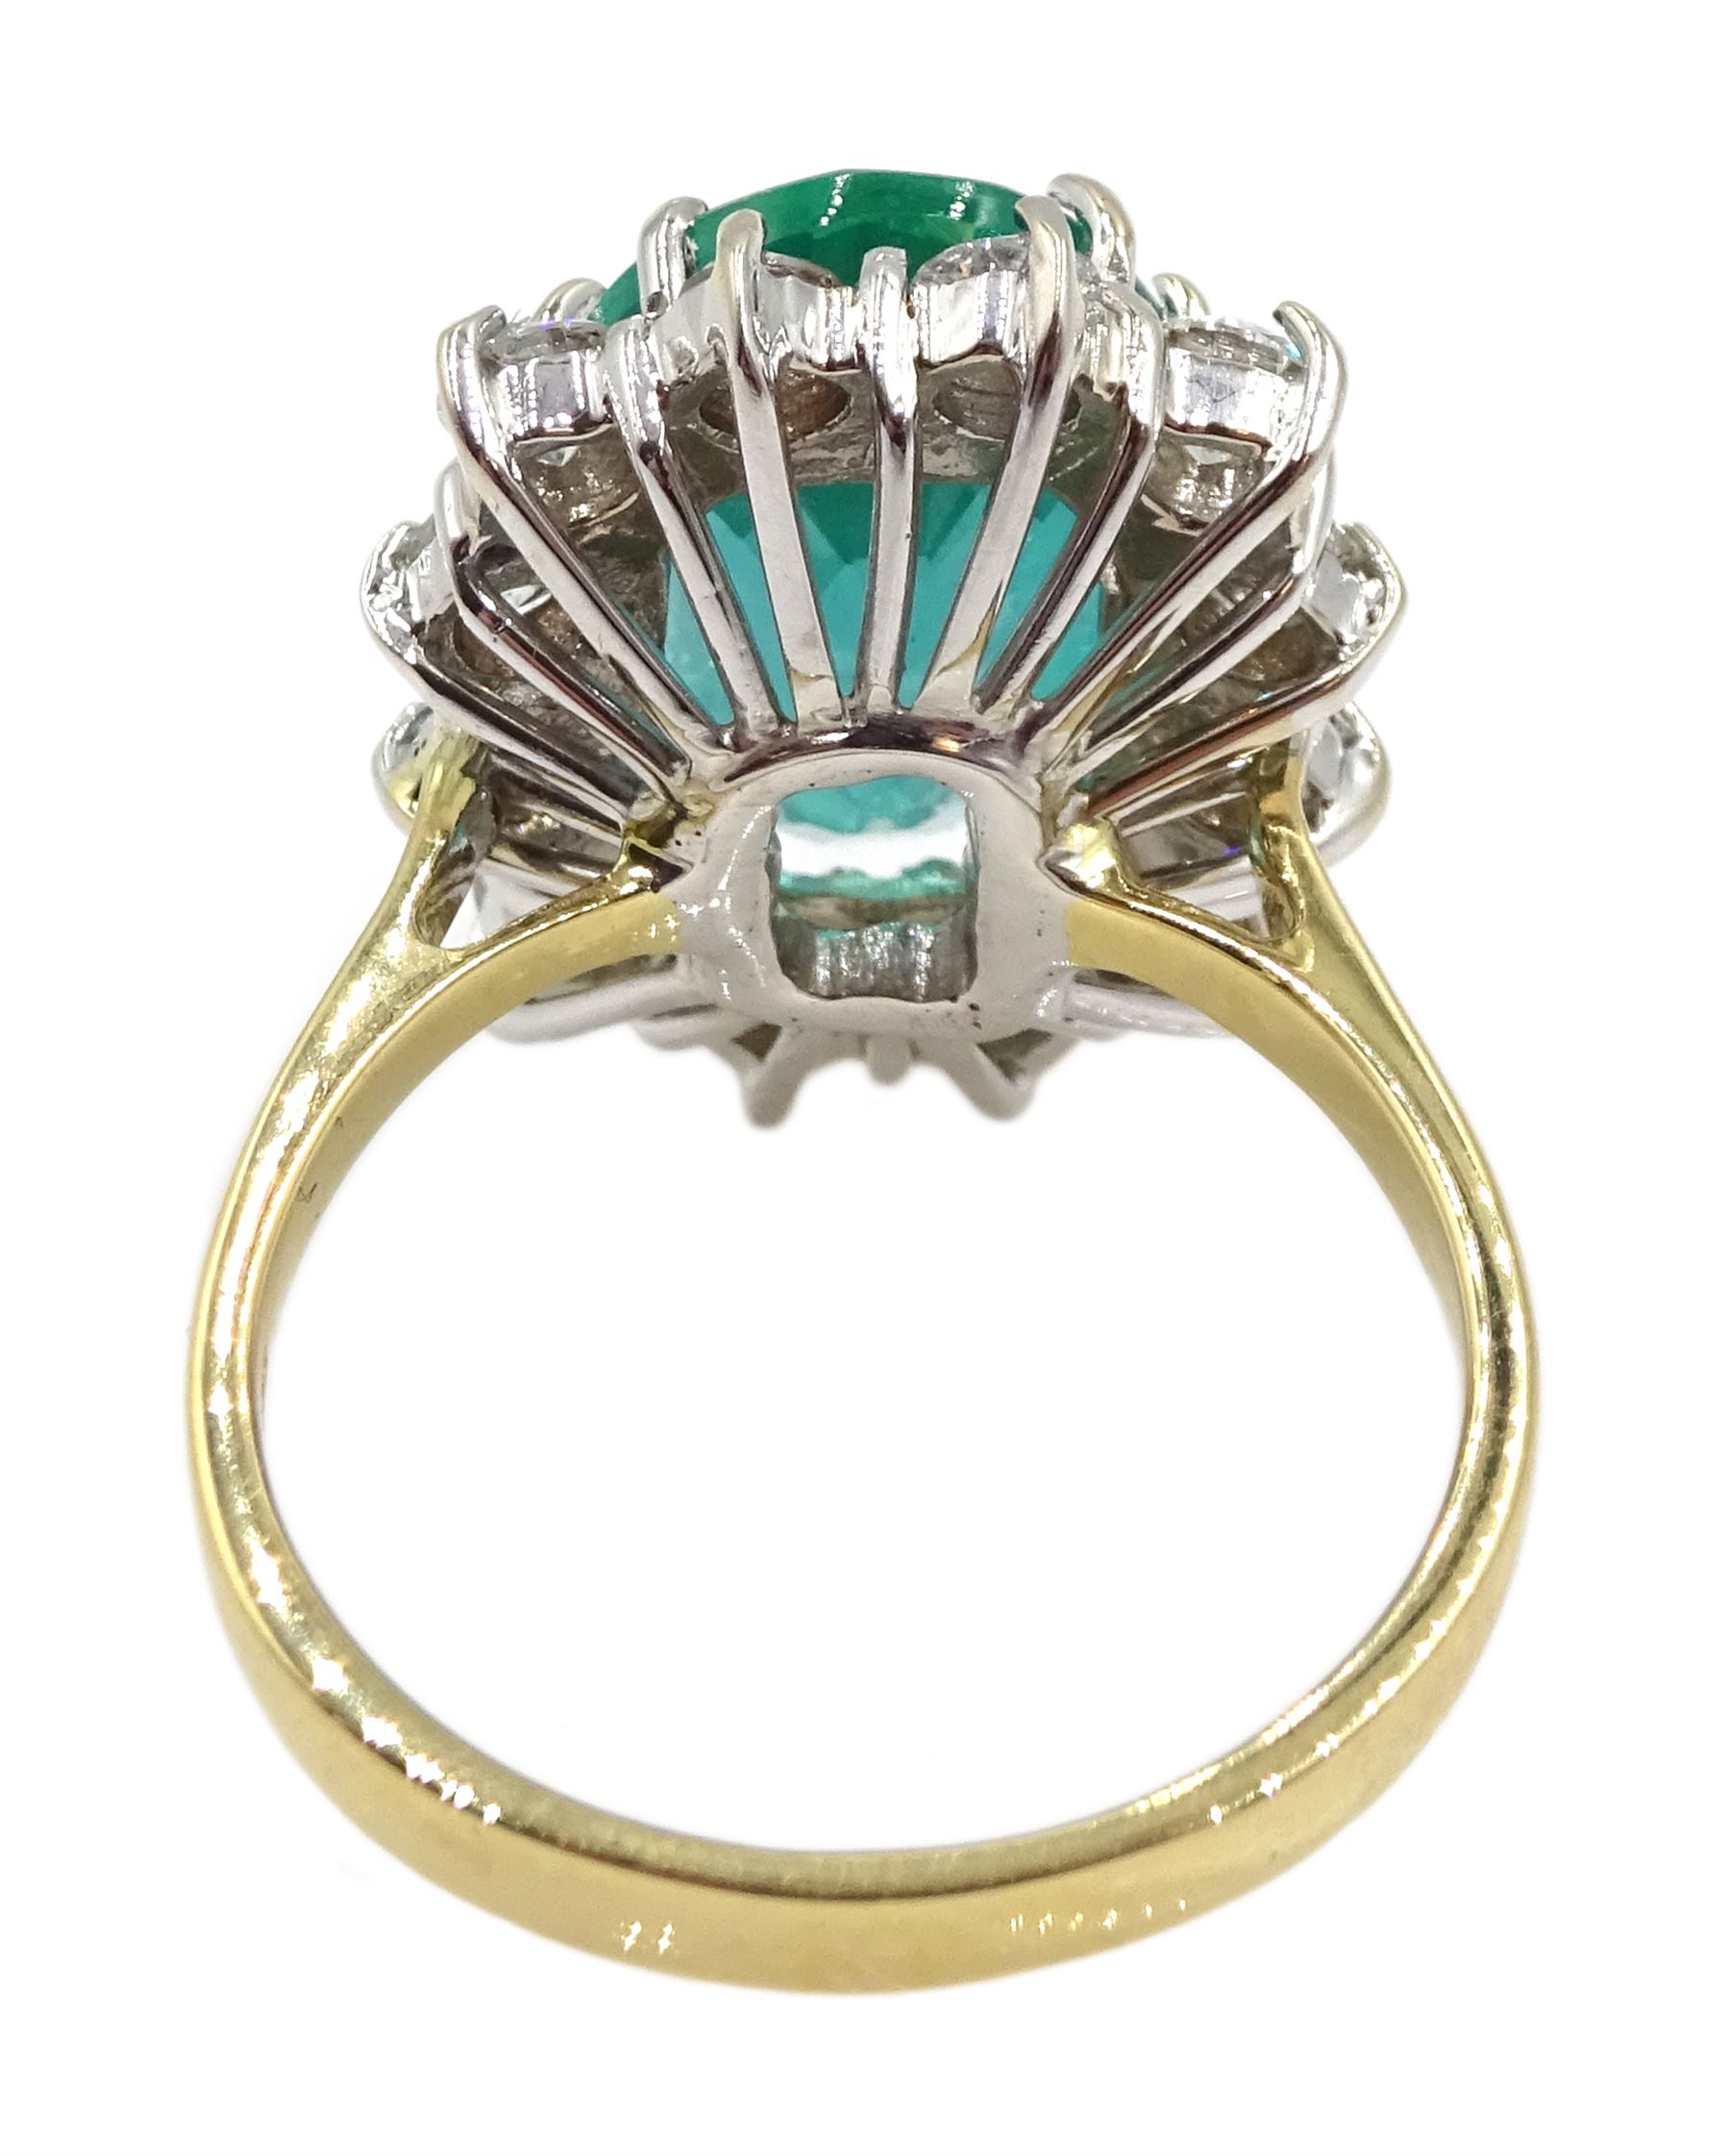 18ct gold oval Zambian emerald and round brilliant cut diamond cluster ring - Image 11 of 16